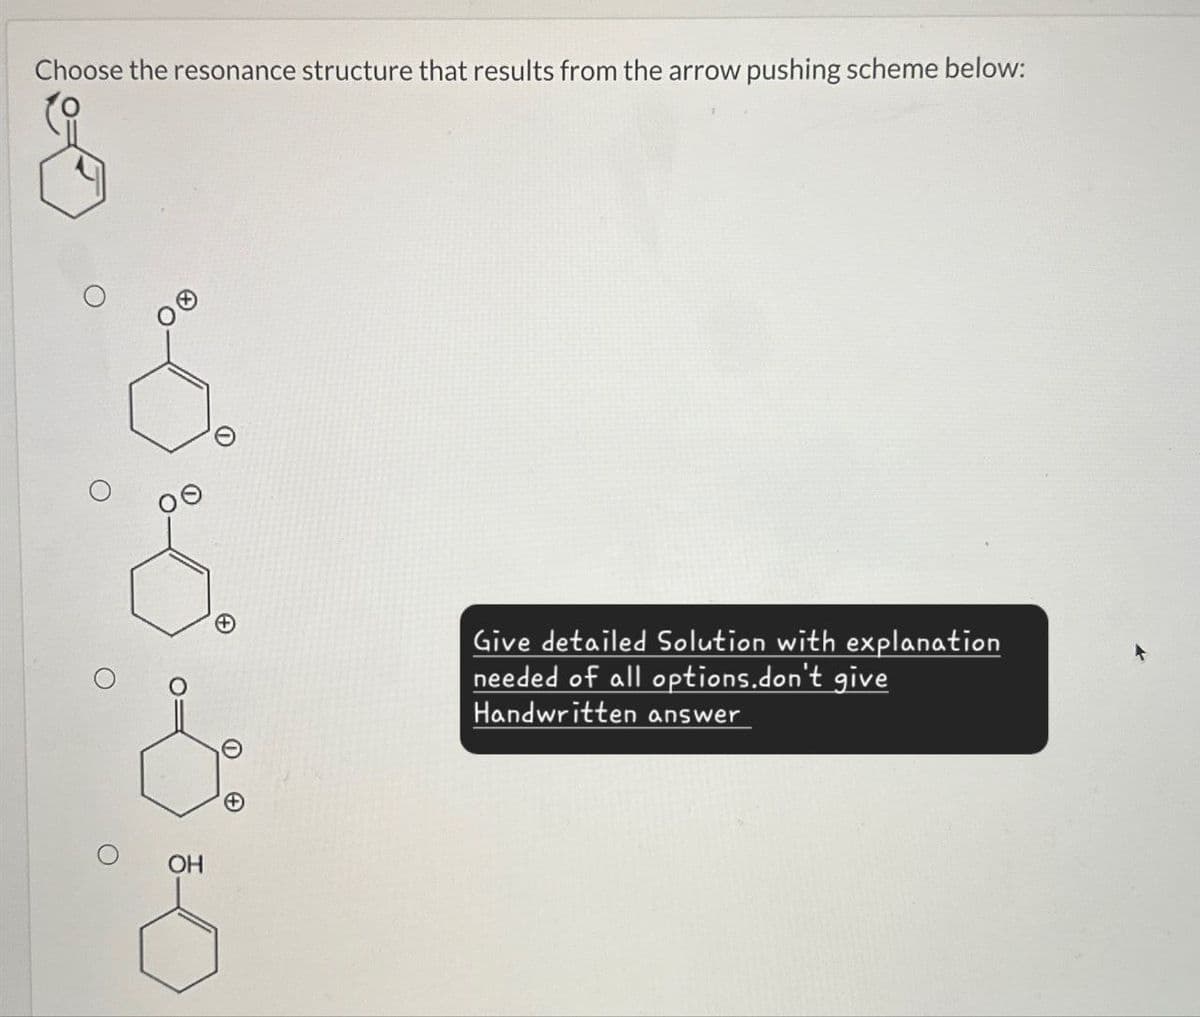 Choose the resonance structure that results from the arrow pushing scheme below:
A
H
OH
Give detailed Solution with explanation
needed of all options.don't give
Handwritten answer